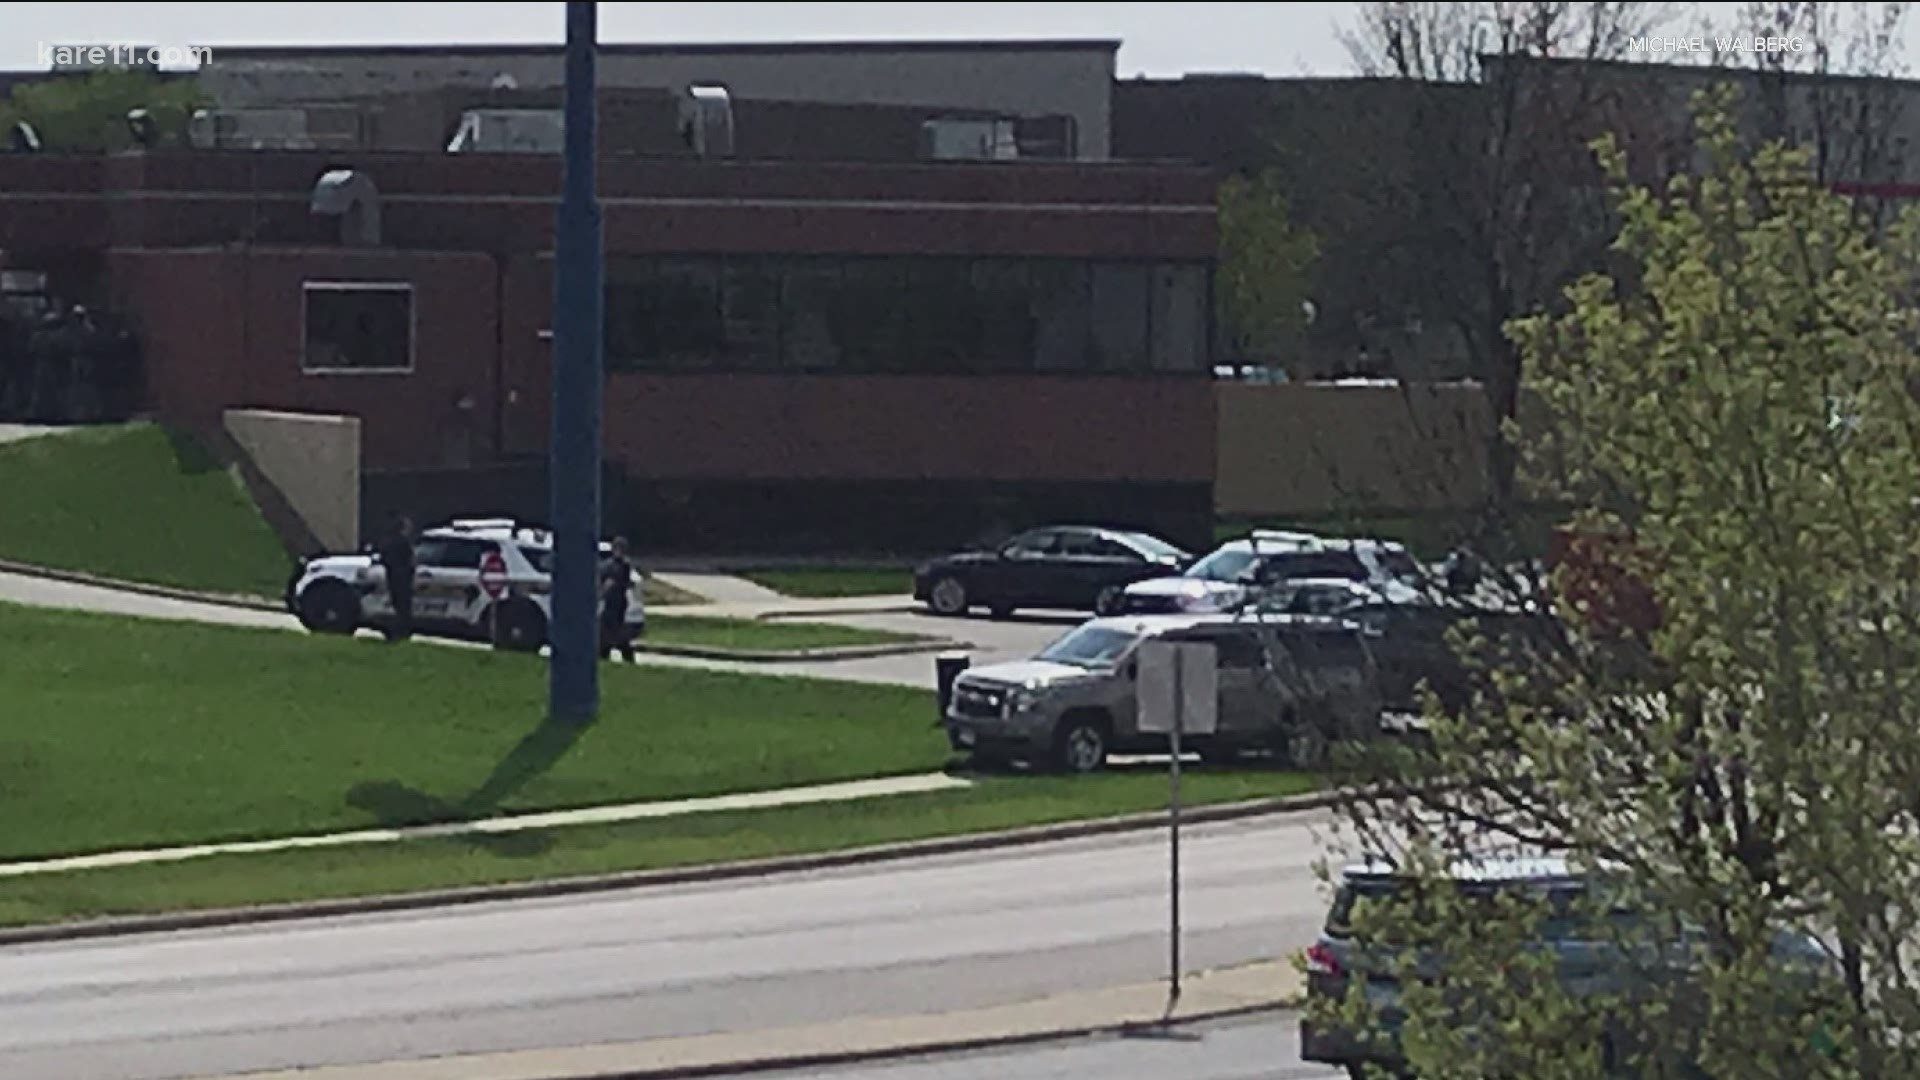 According to St. Cloud police Lt. Lori Ellering, there is an undisclosed number of bank employees being held hostage.